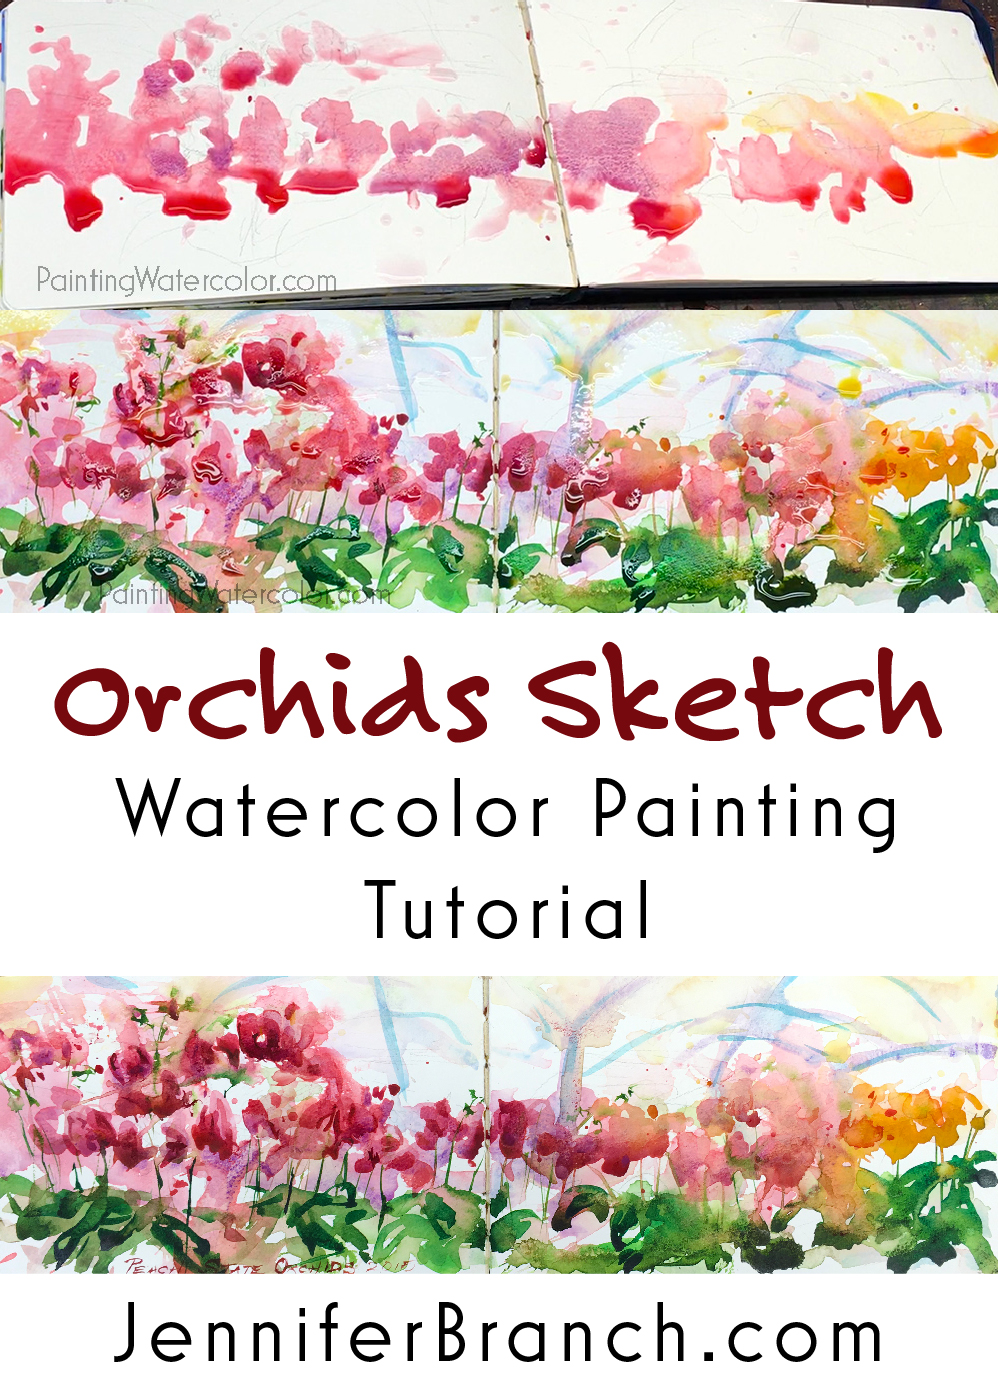 Orchids Sketch watercolor painting tutorial by Jennifer Branch